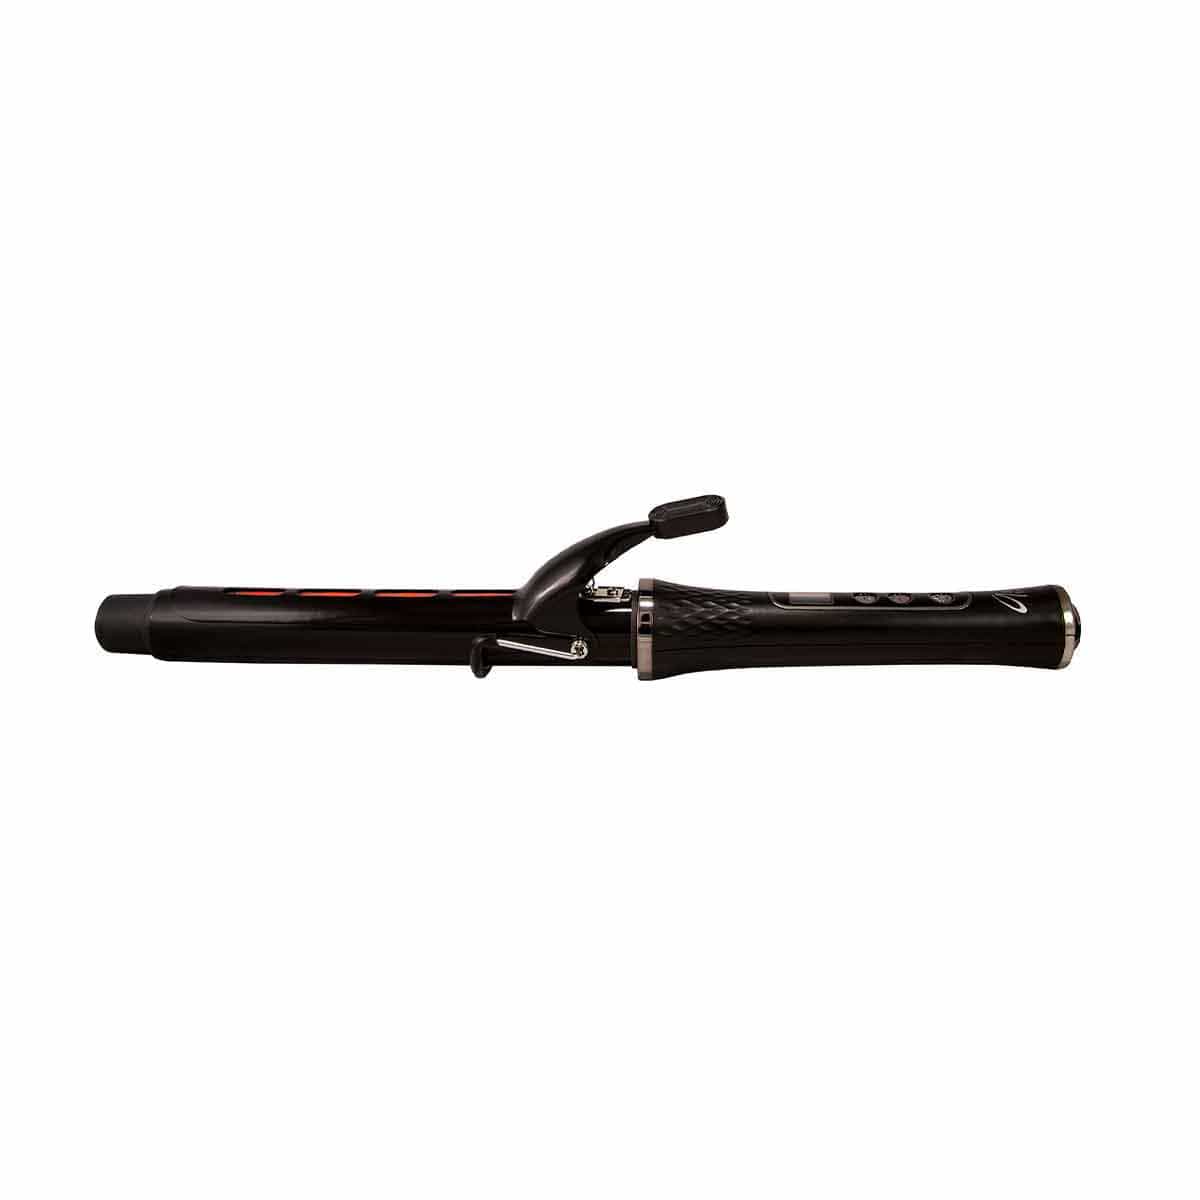 Ariabeauty Curling Wands / Curling Irons Salon Pro 1" Infrared Curling Iron With Clamp